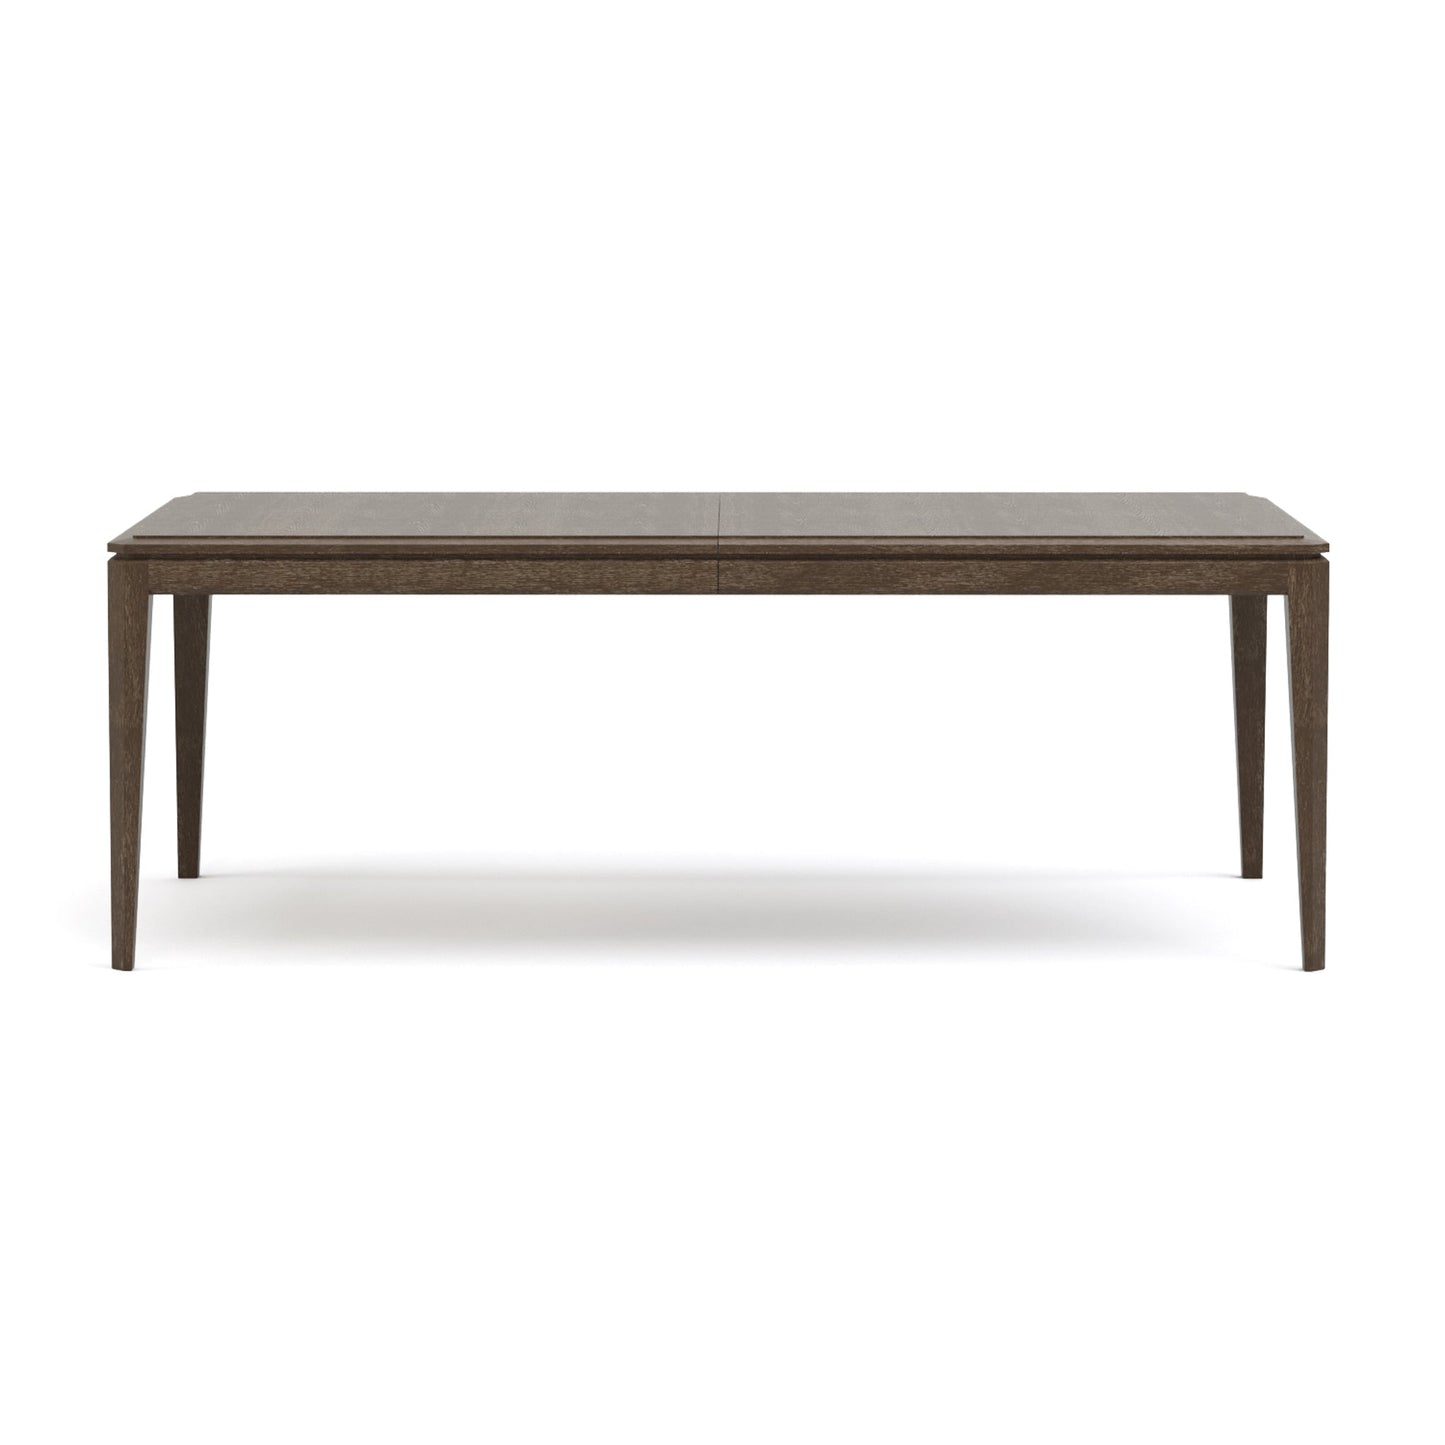 Maidstone Rectangular Dining Table in 202 Pier finish